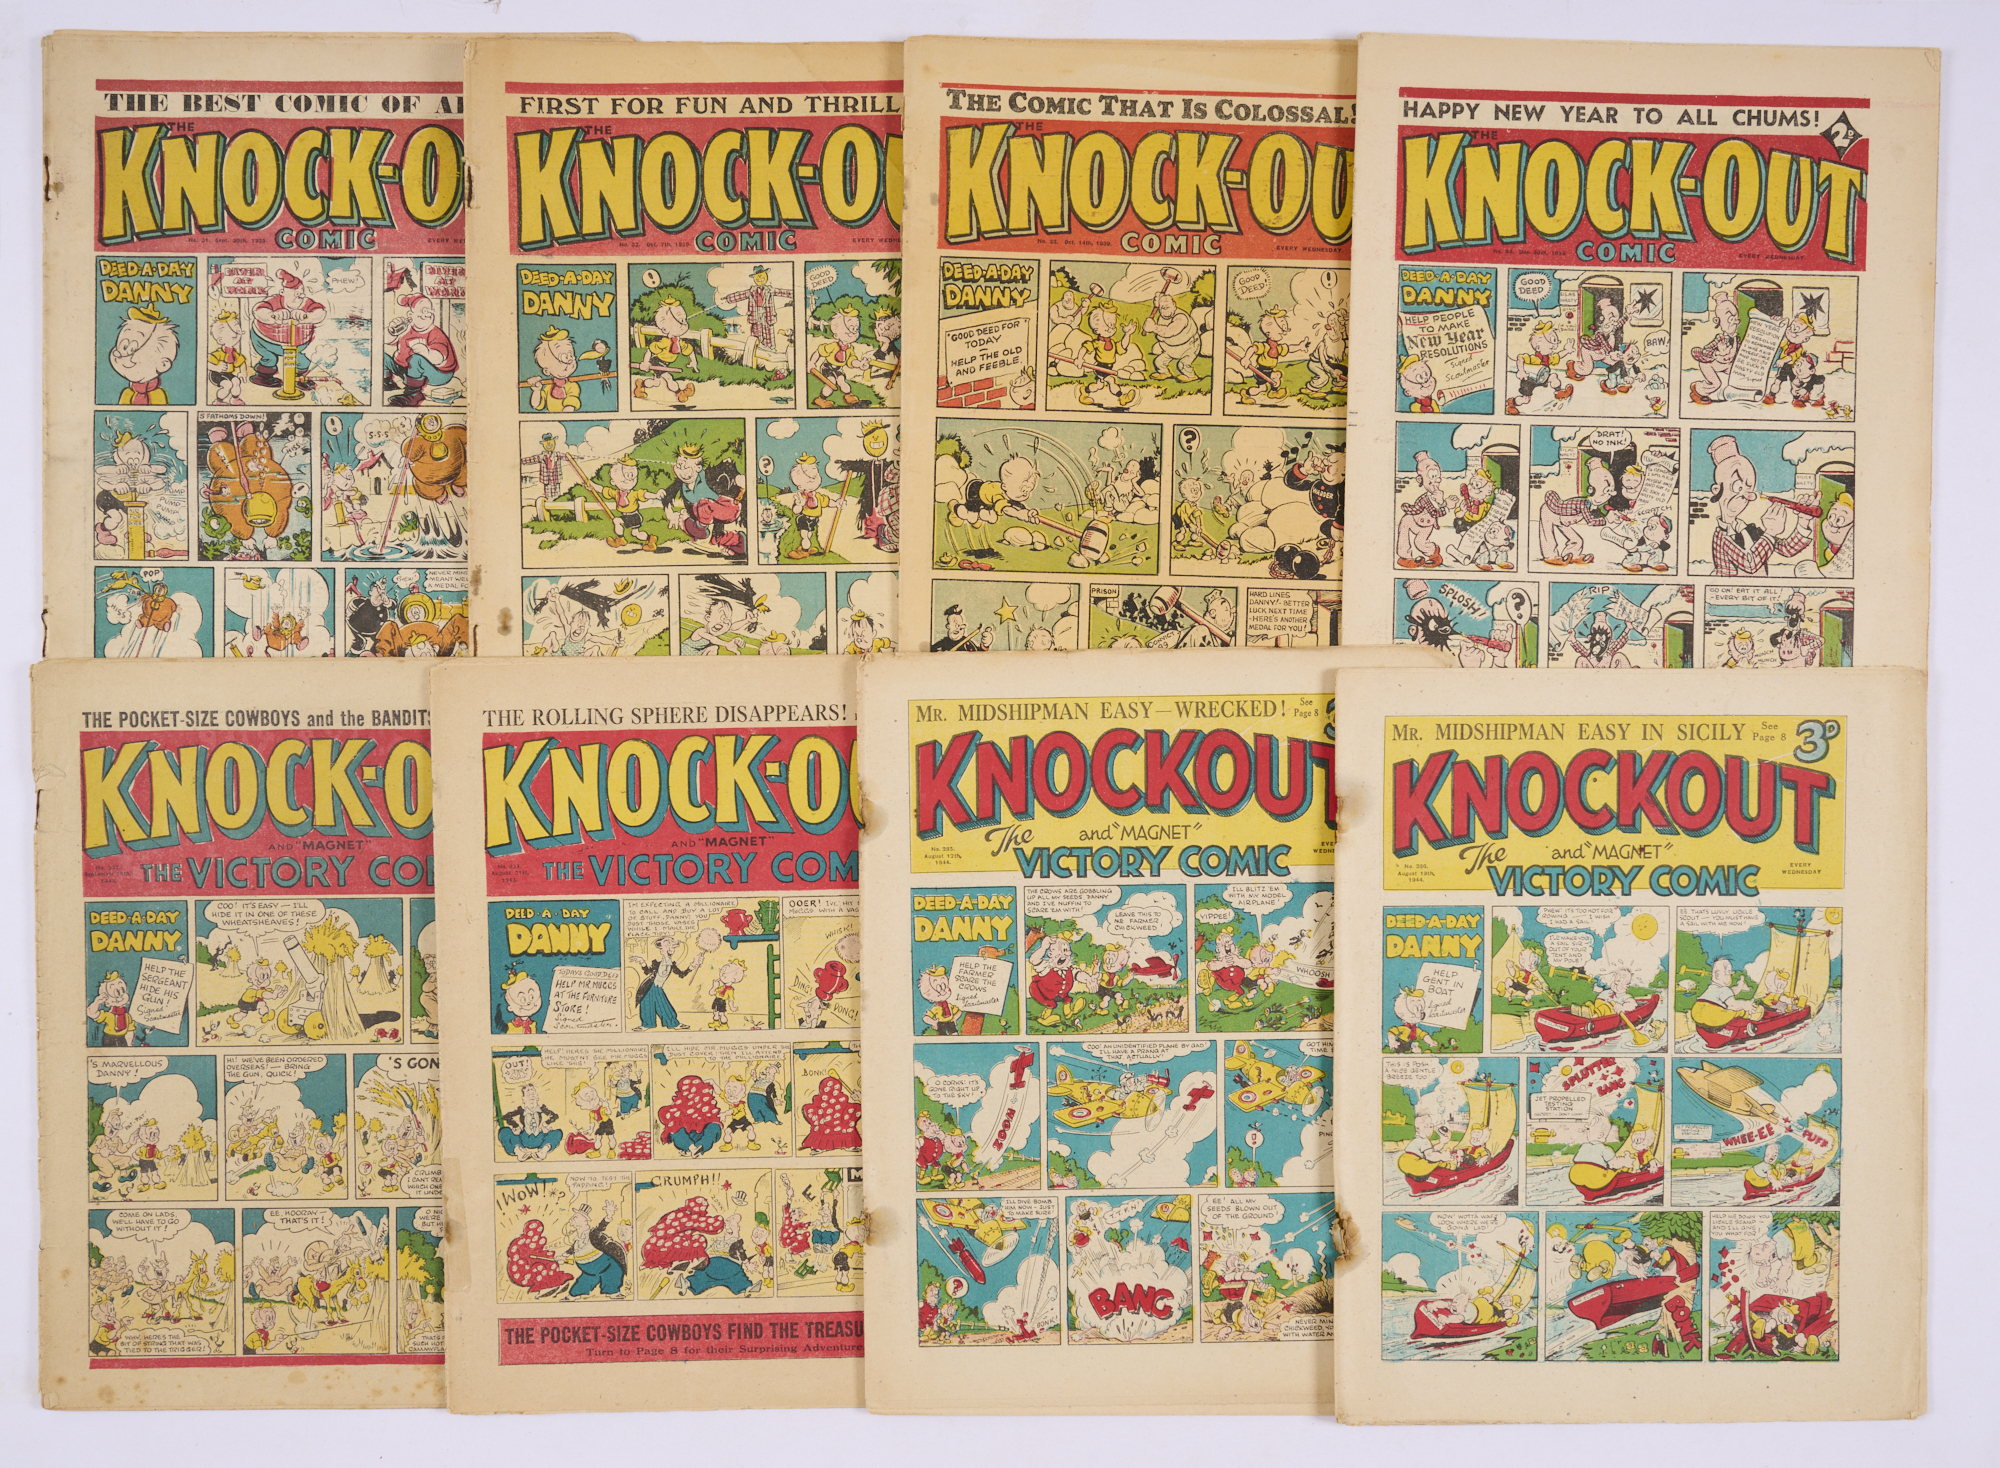 Knock-Out (1939-44) 31-33, 44, 233, 234, 285, 286. Starring Deed-A-Day Danny, Sexton Blake